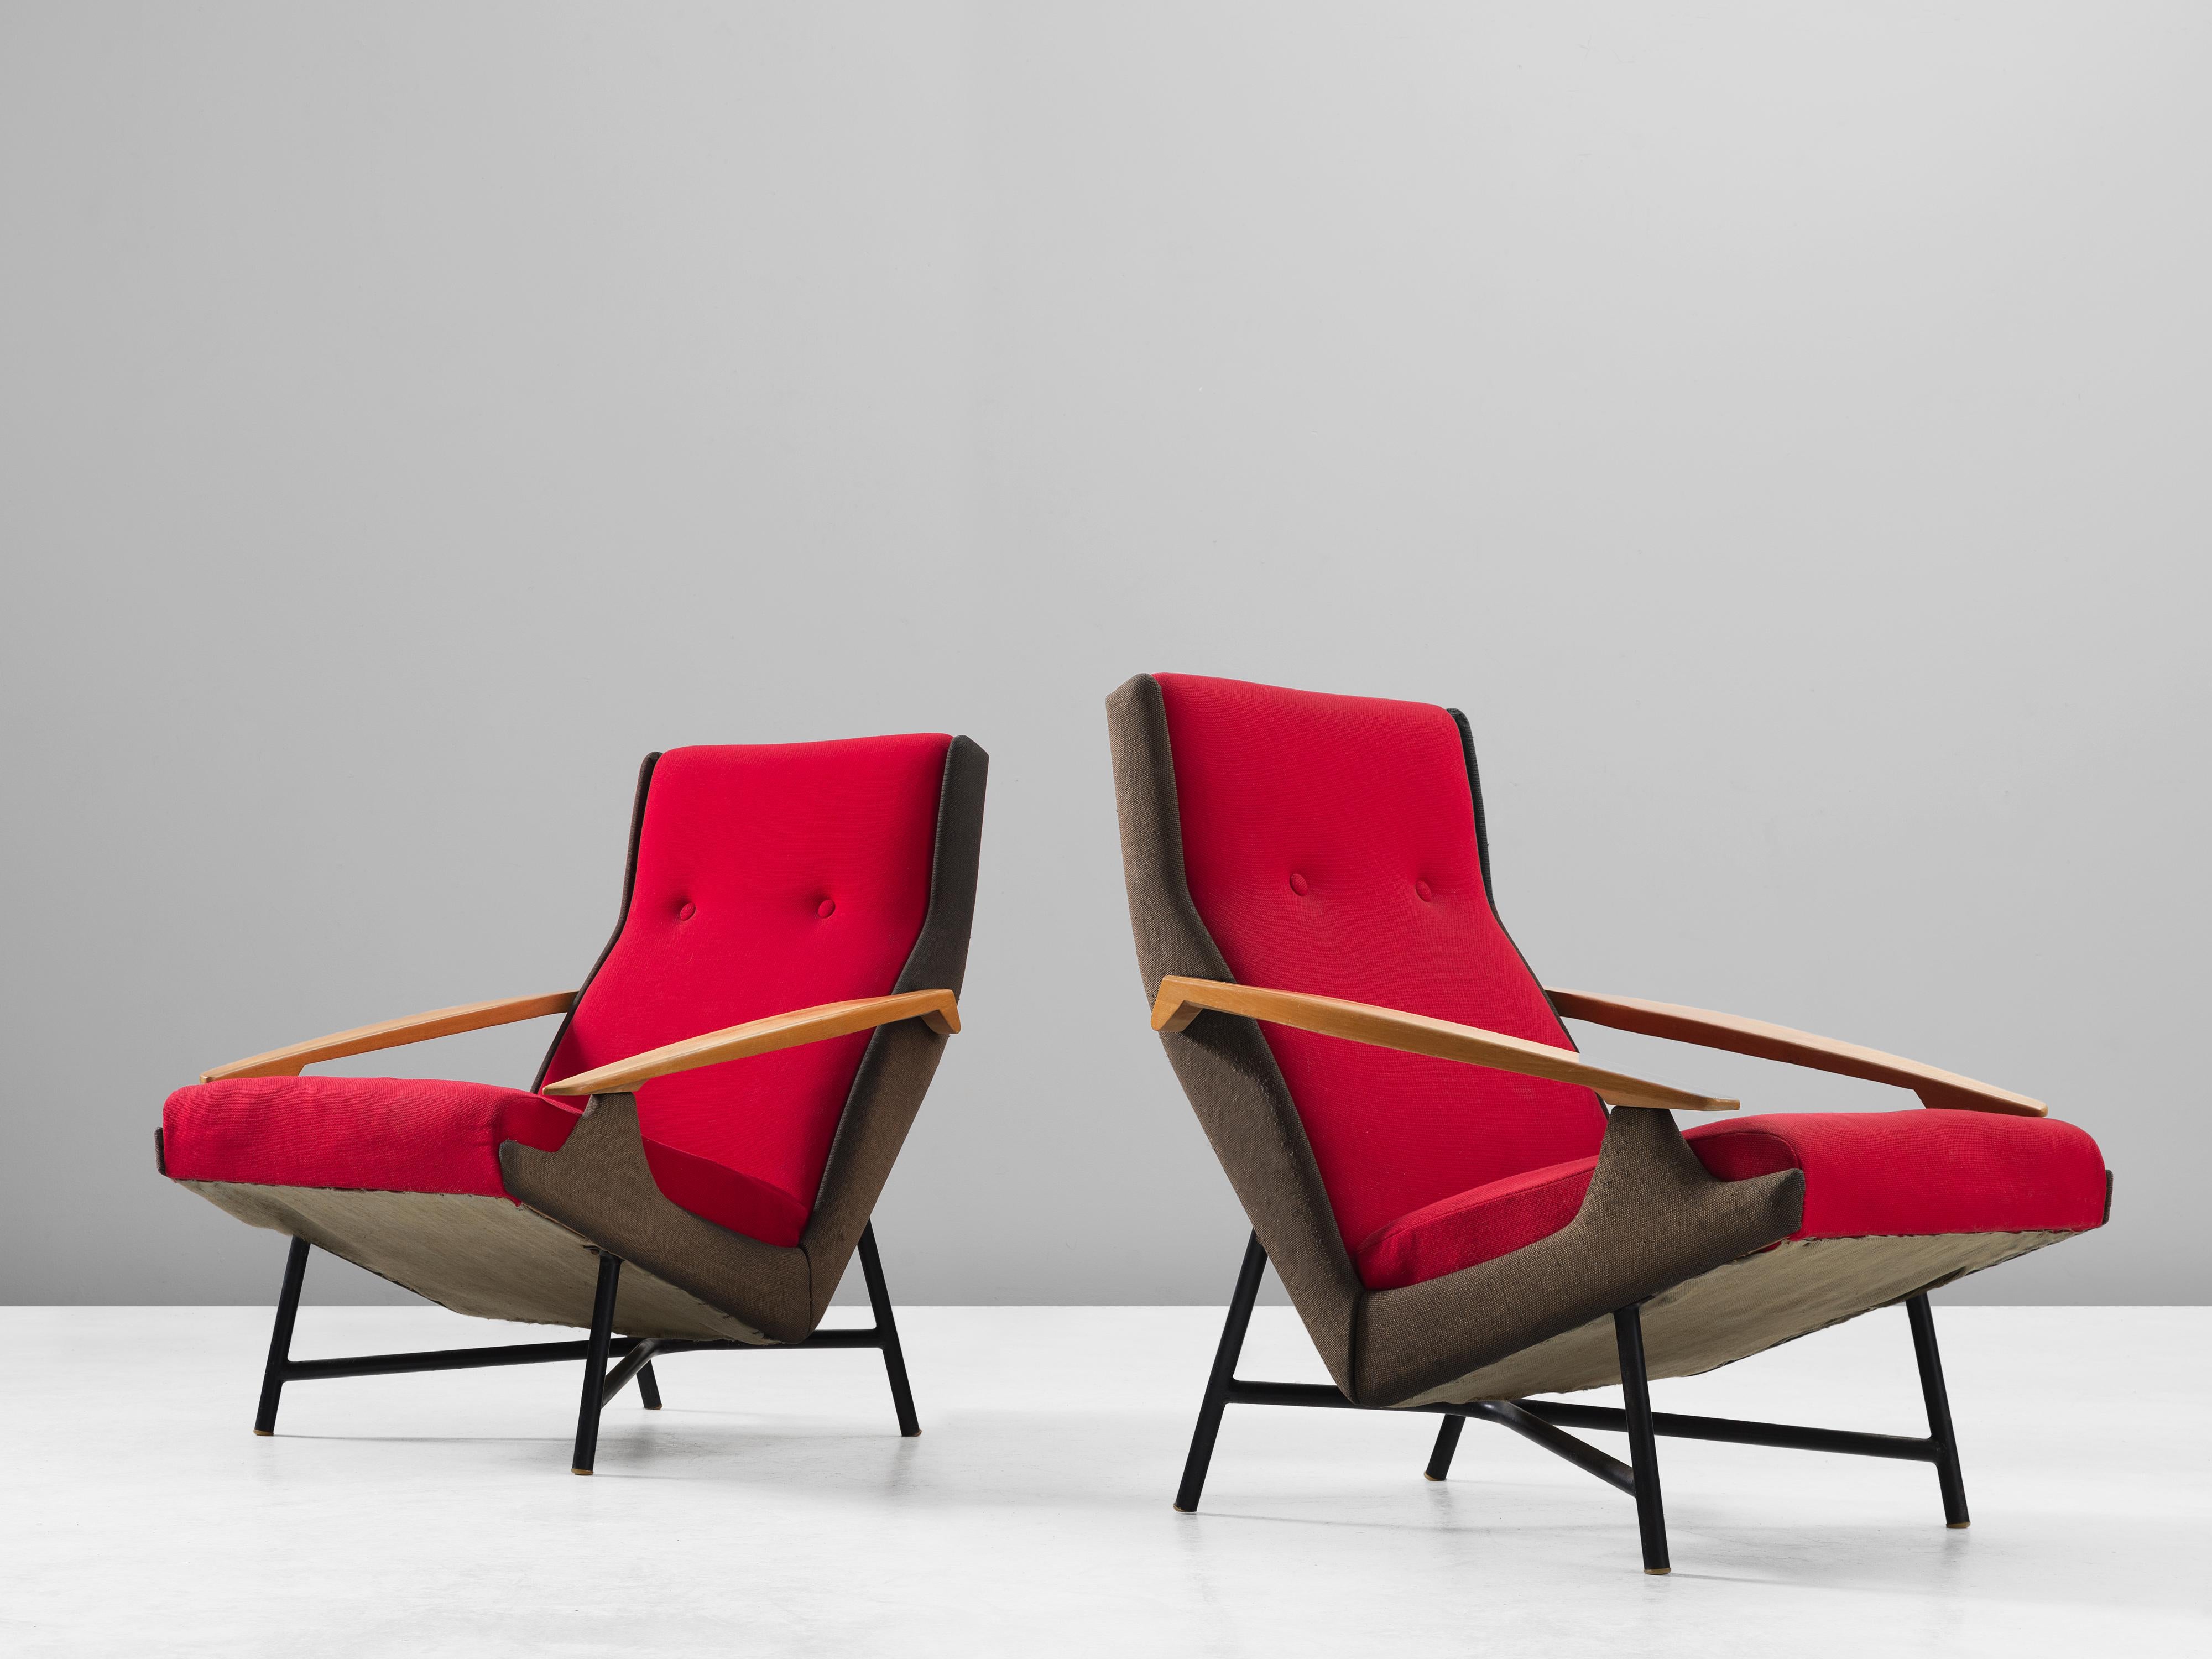 Set of two lounge chairs, in beech, metal and fabric, by Claude Vassal, France, 1950s. 

A pair of modern armchairs in black and red upholstery. These chairs show an interesting combination of materials and get therefore their unique appearance. The